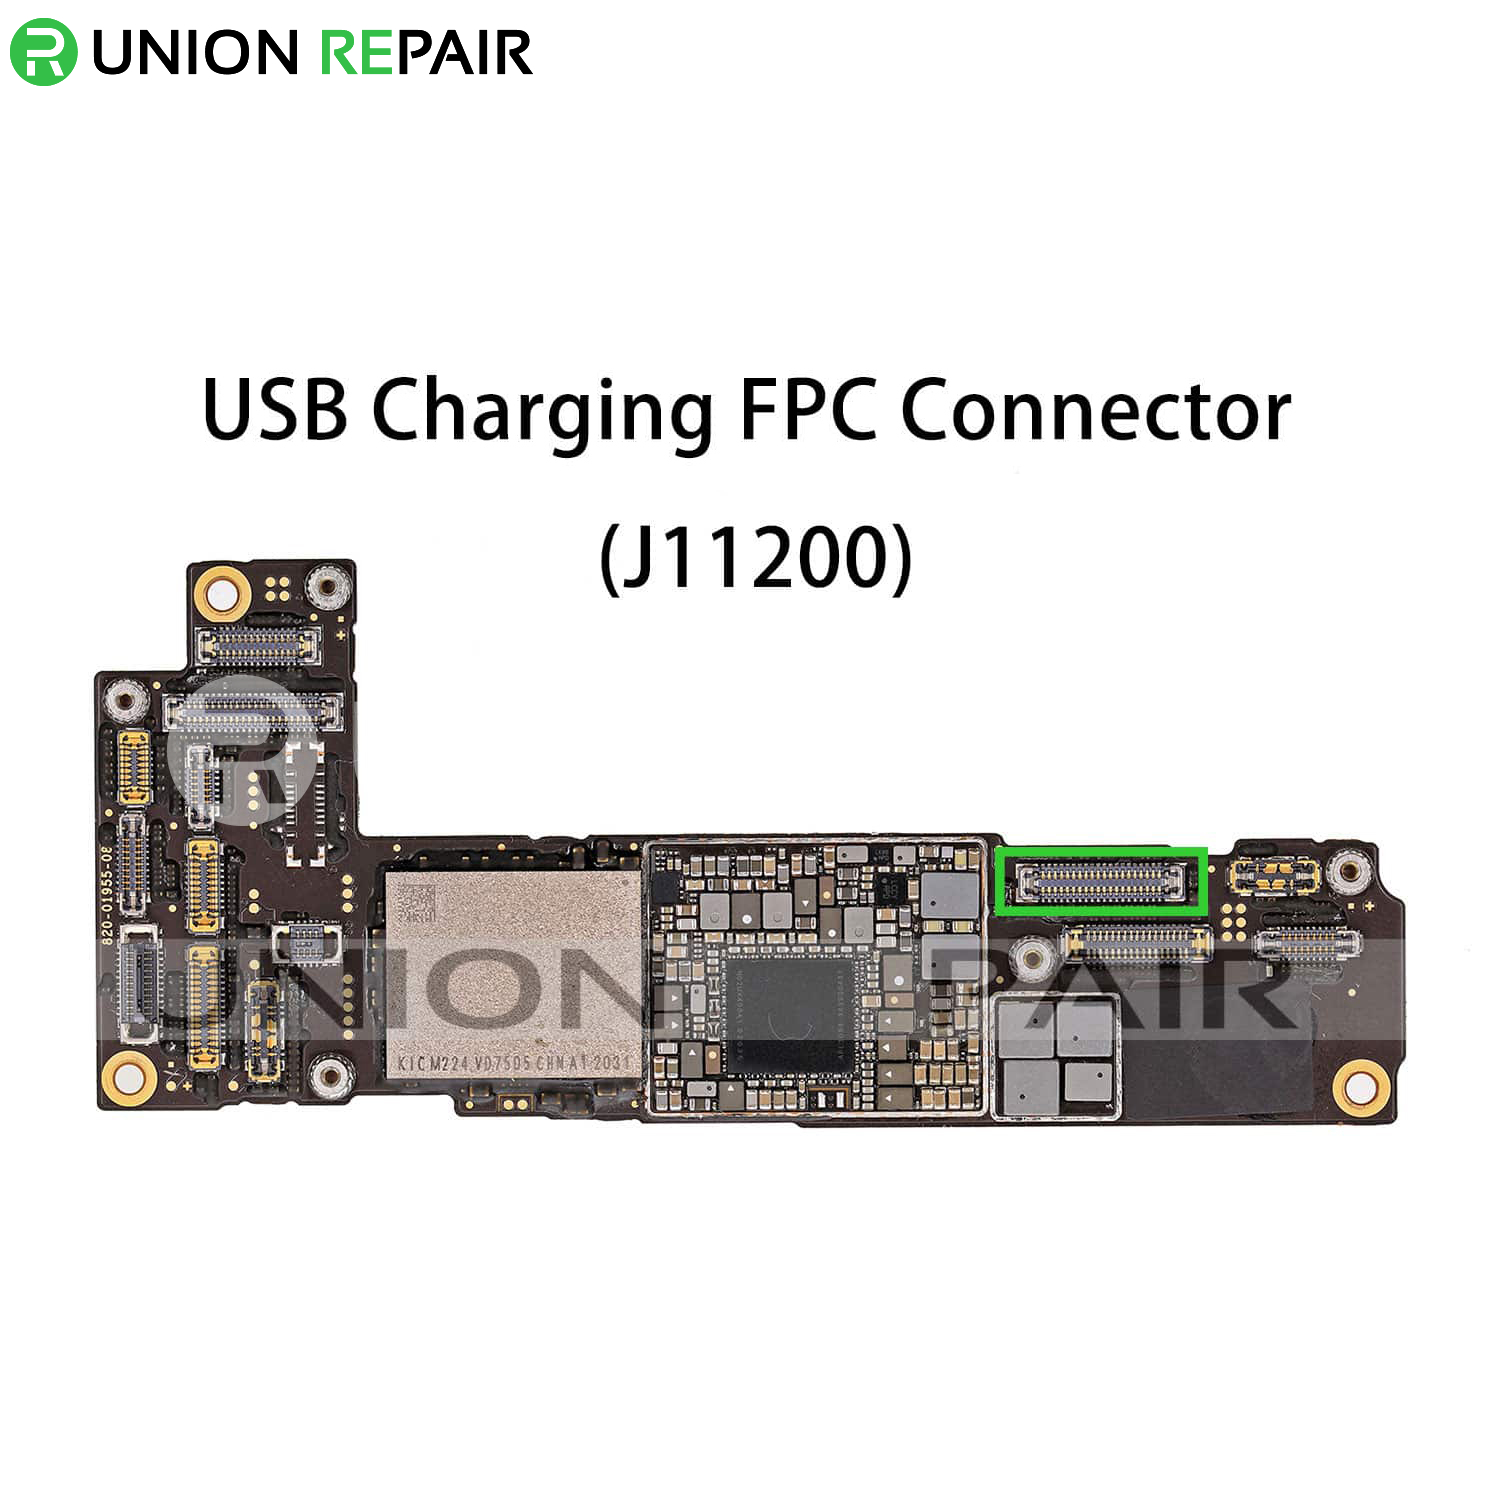  Replacement for iPhone 12/12 Pro USB Charging Connector Port Onboard, fig. 1 